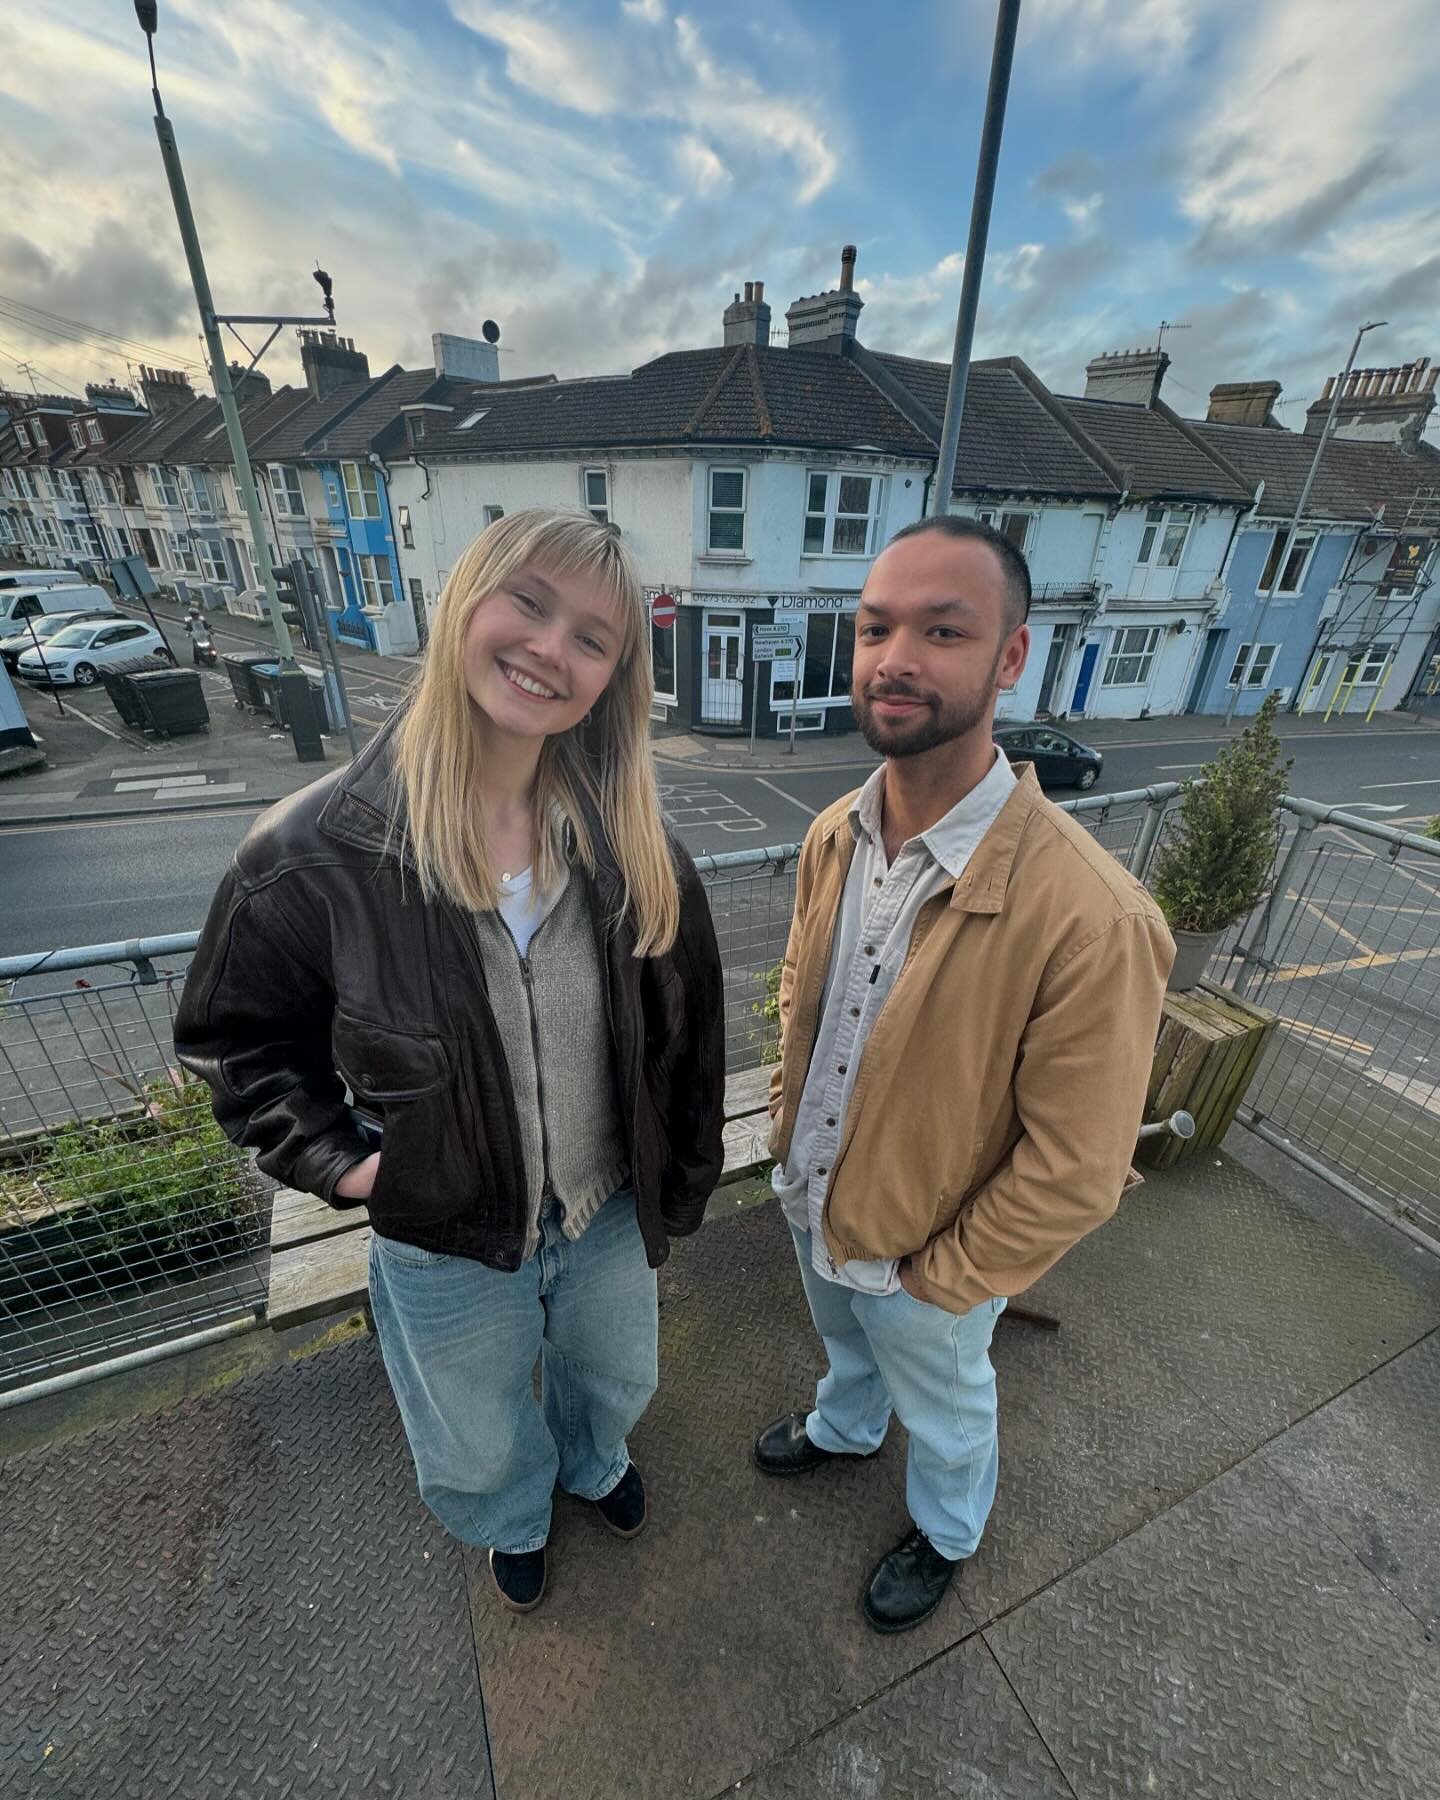 ON AIR NOW: AQUA w/ @racheladderley &amp; special guest @sam.ruthen💧playing Indie, Soul and Alt funk &lsquo;TIL 9PM 💧ft. tracks from @lucyblue @foglake_ &amp; @colouring 🔒 Keep it locked at 105.5FM - PLATFORMB.ORG.UK - DAB 🔒